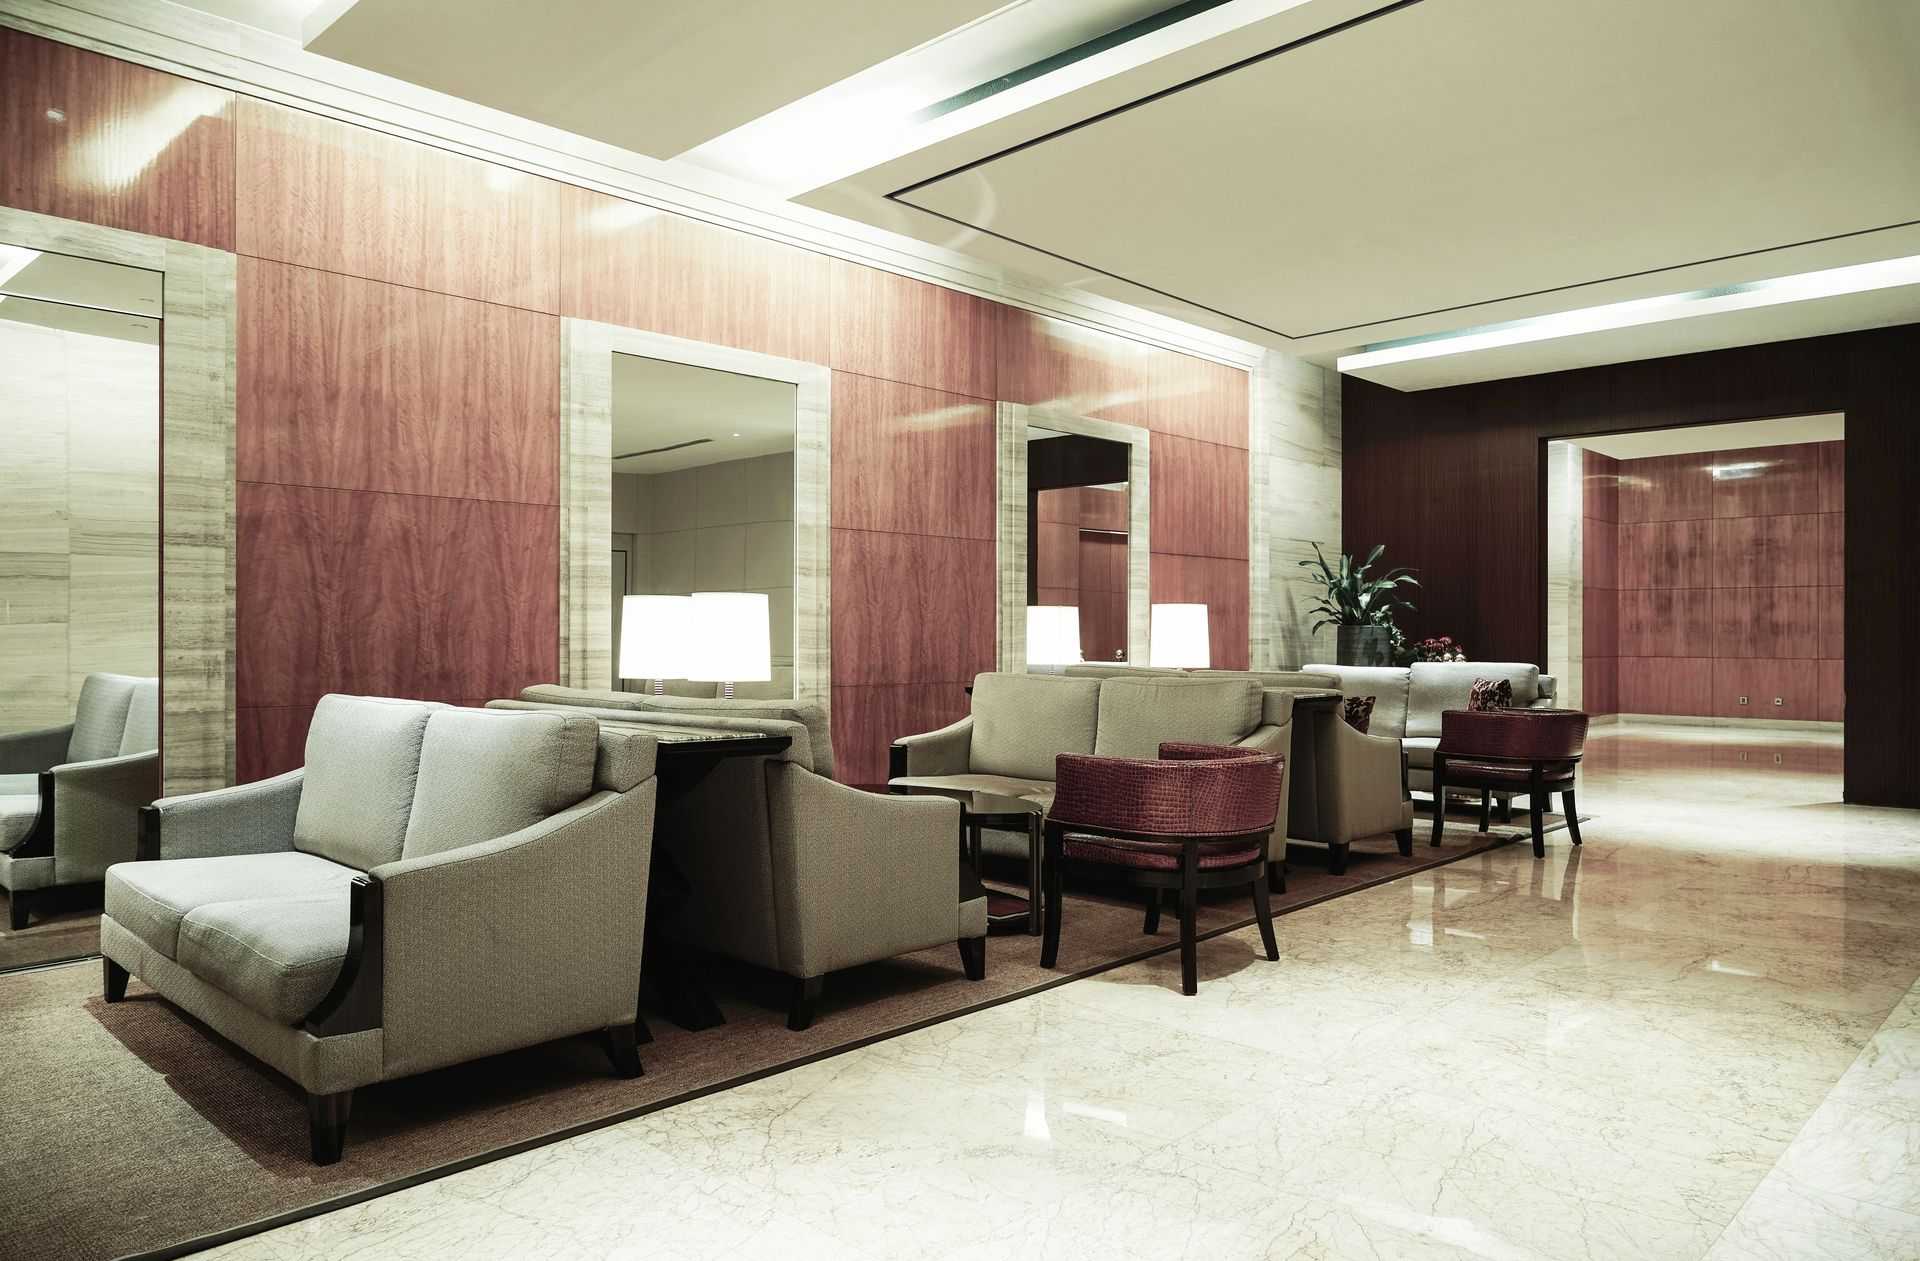 Premium hotel lobby with architectural line diffusers